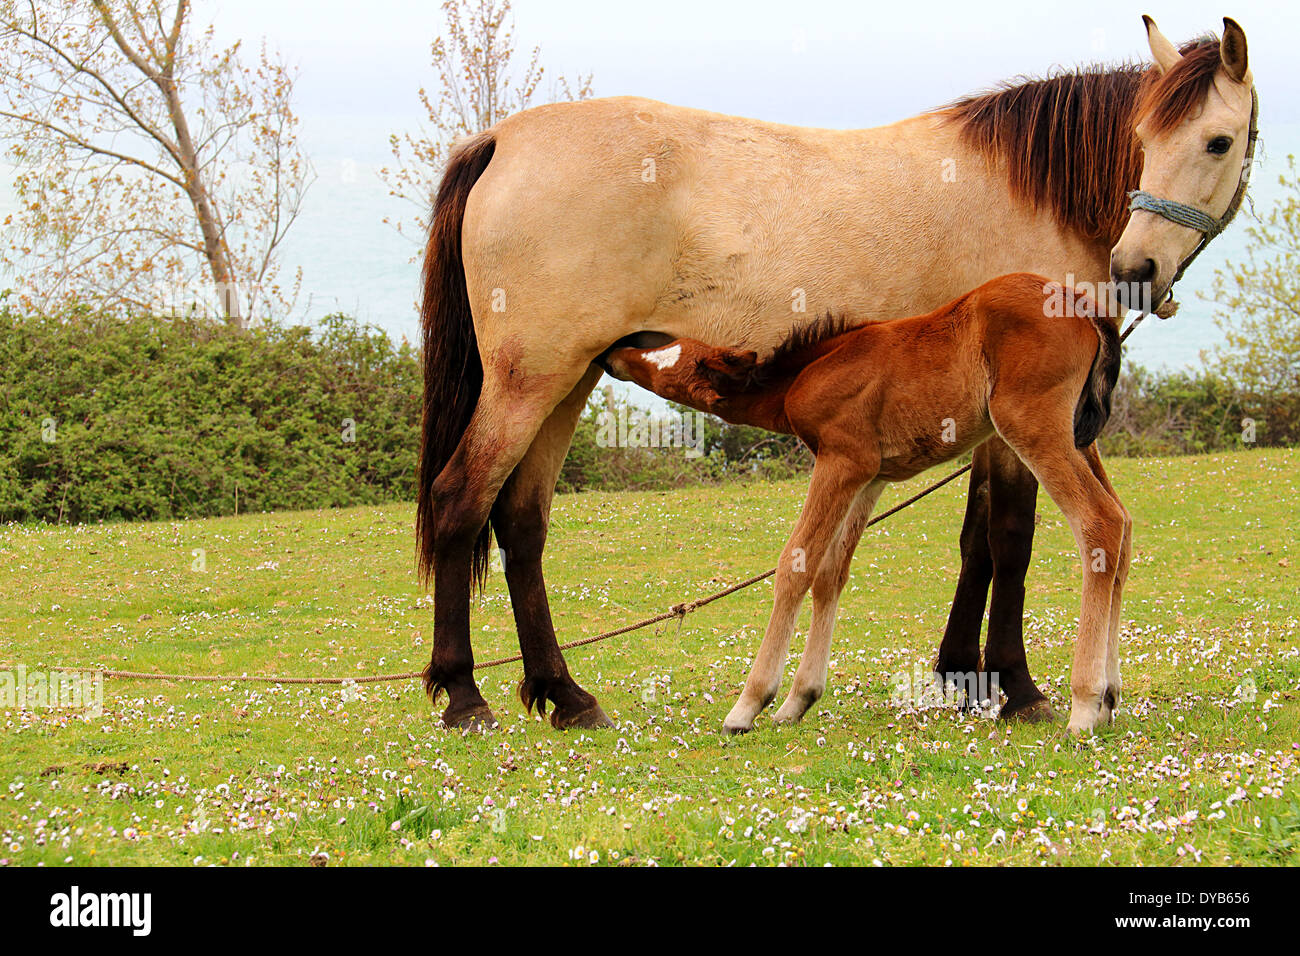 Foal is Suckling the Milk From It's Mother on the Grass Stock Photo